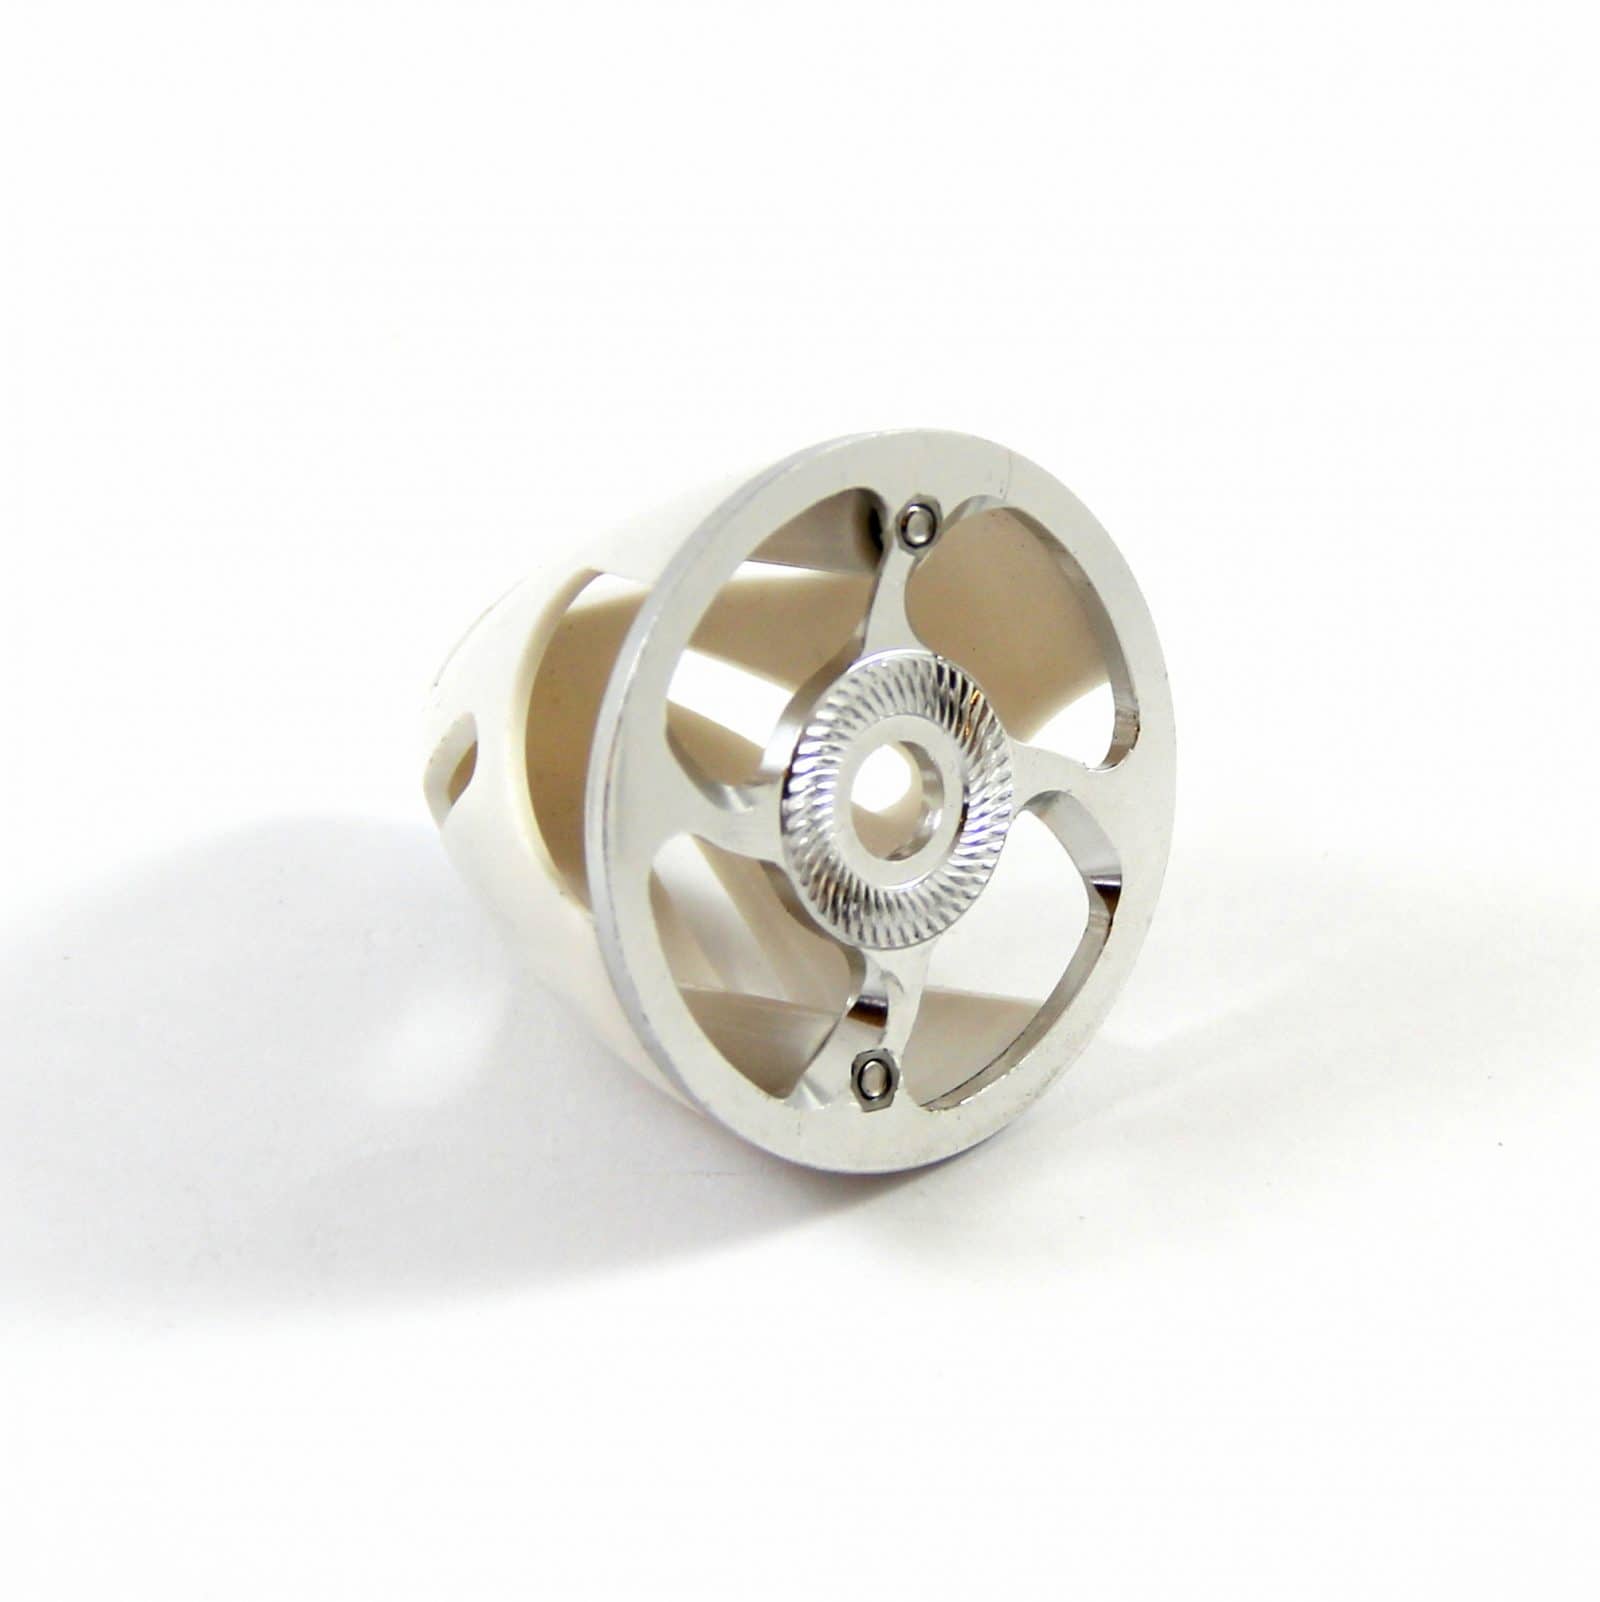 Kuza Vented Electric Spinner 2" / 51mm White KAG0201W